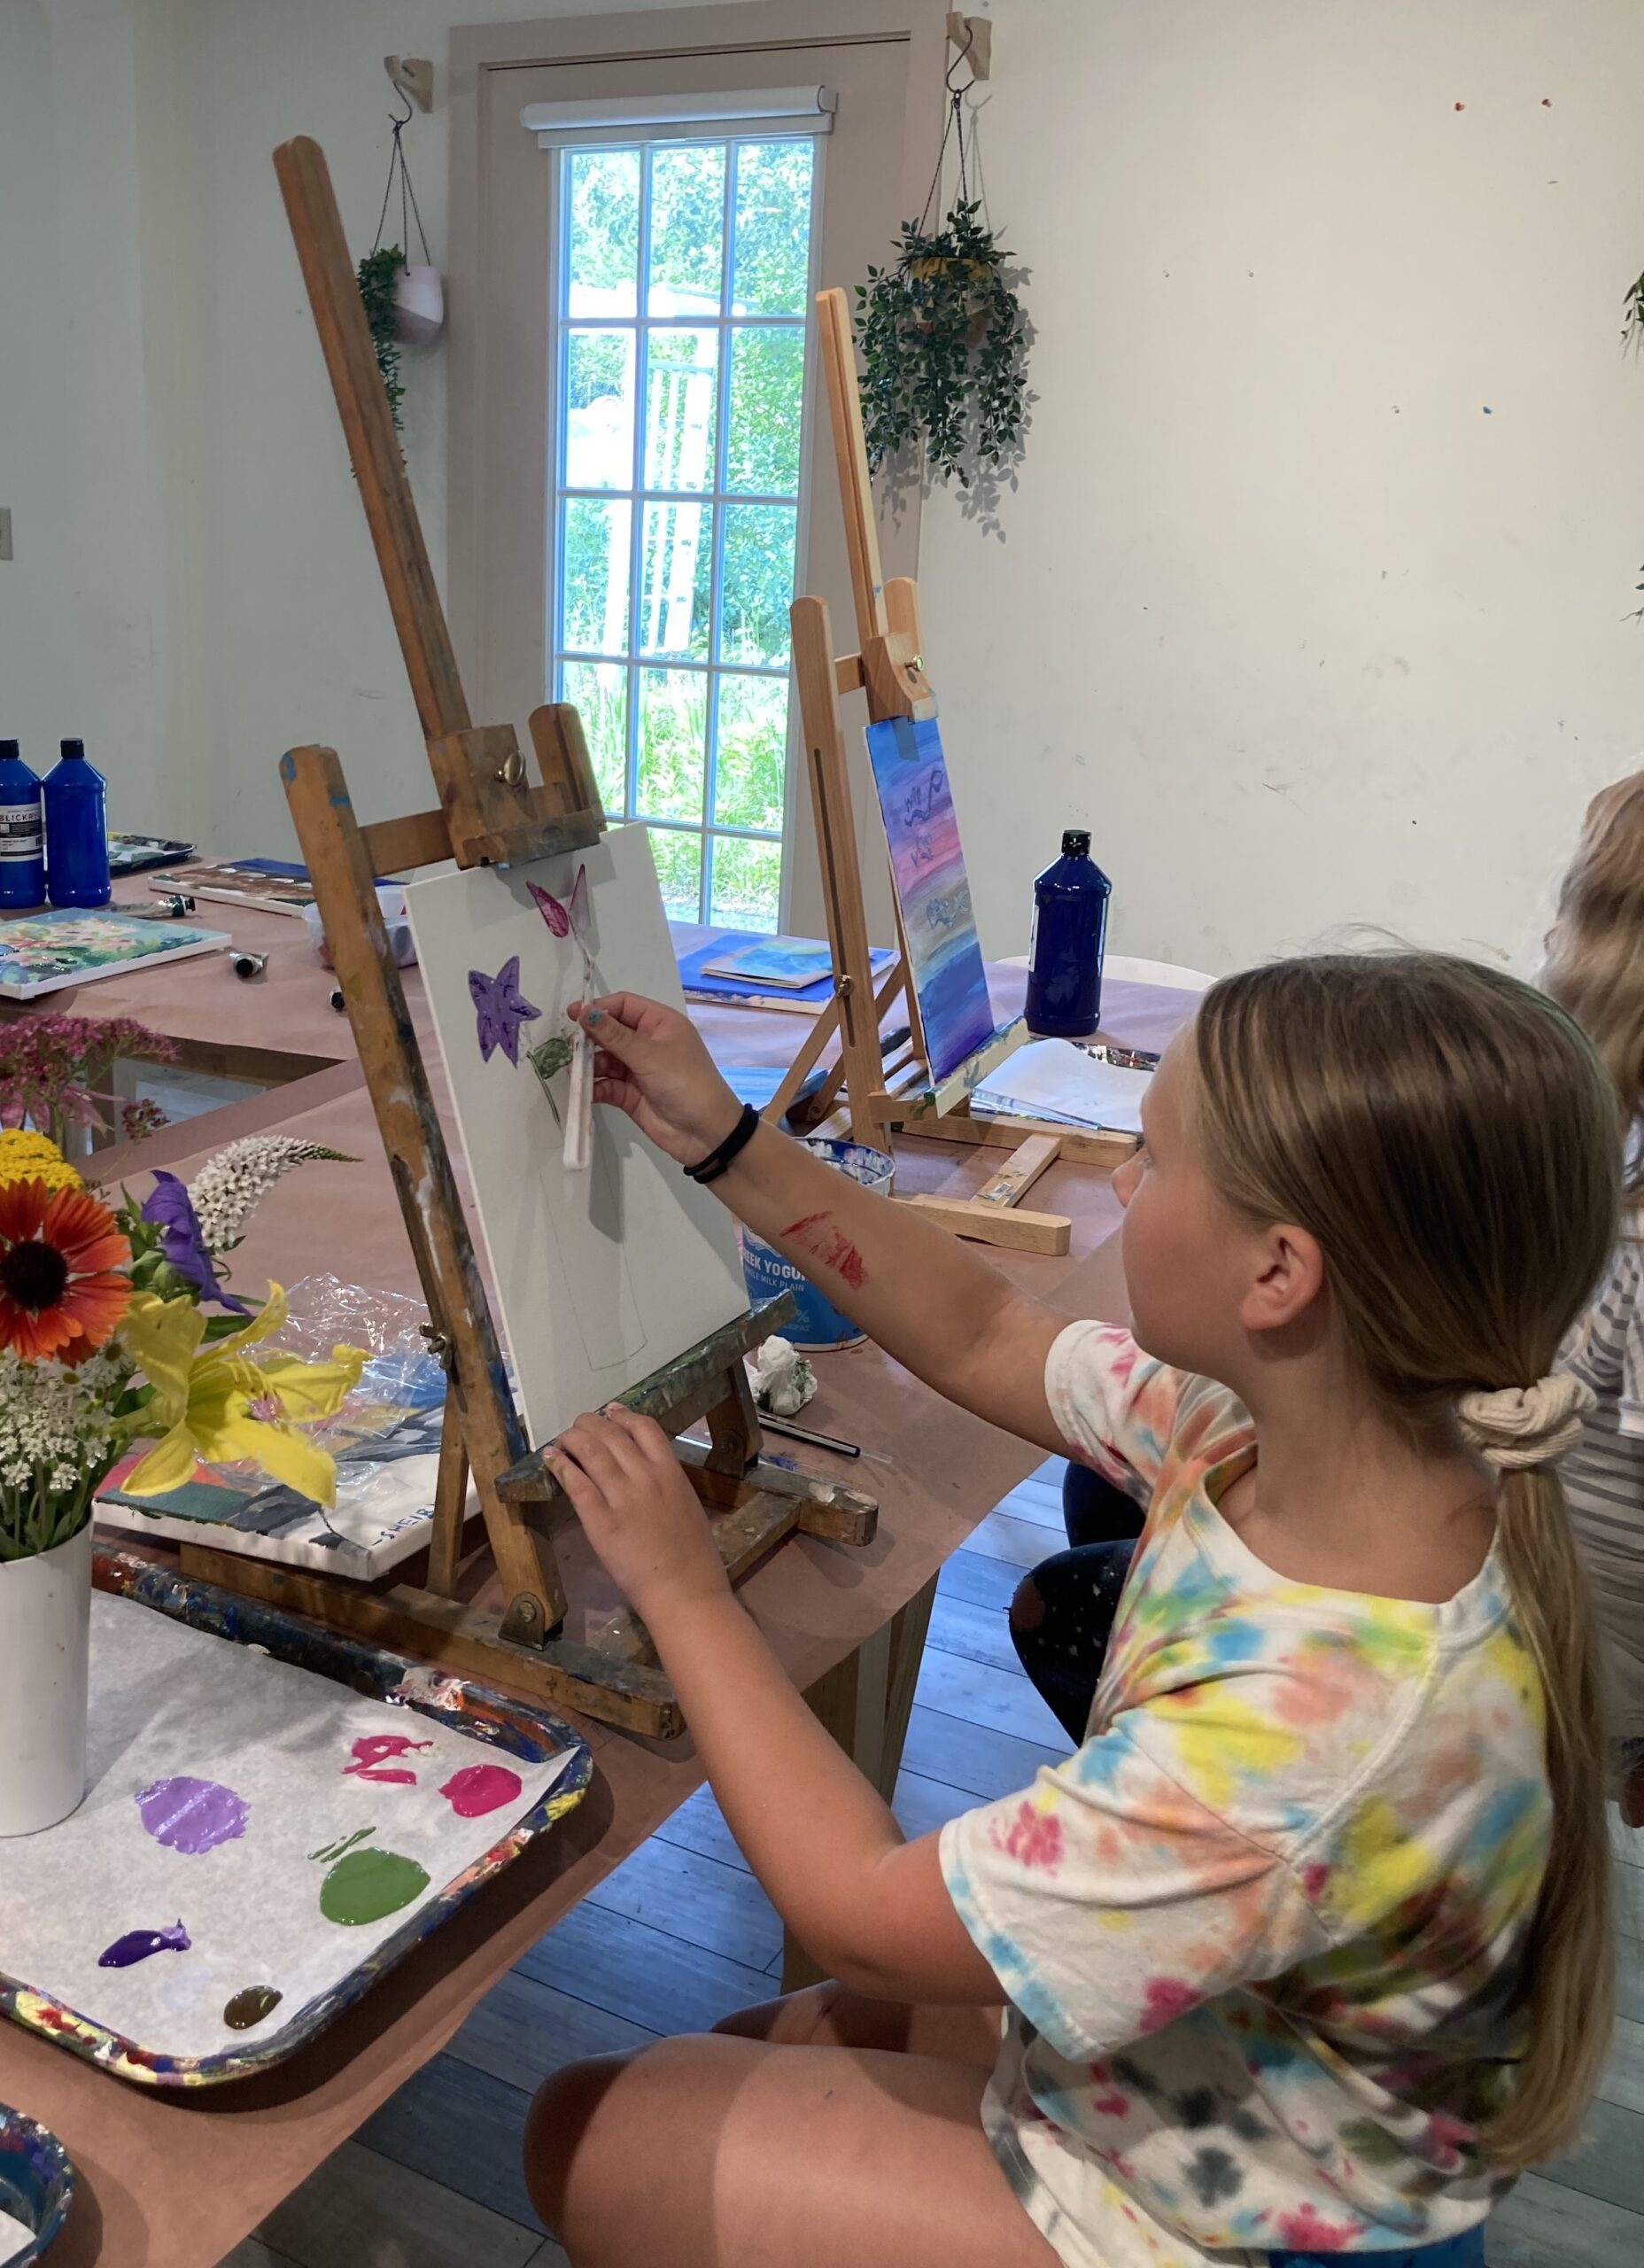 Girl painting in an art studio using an easel